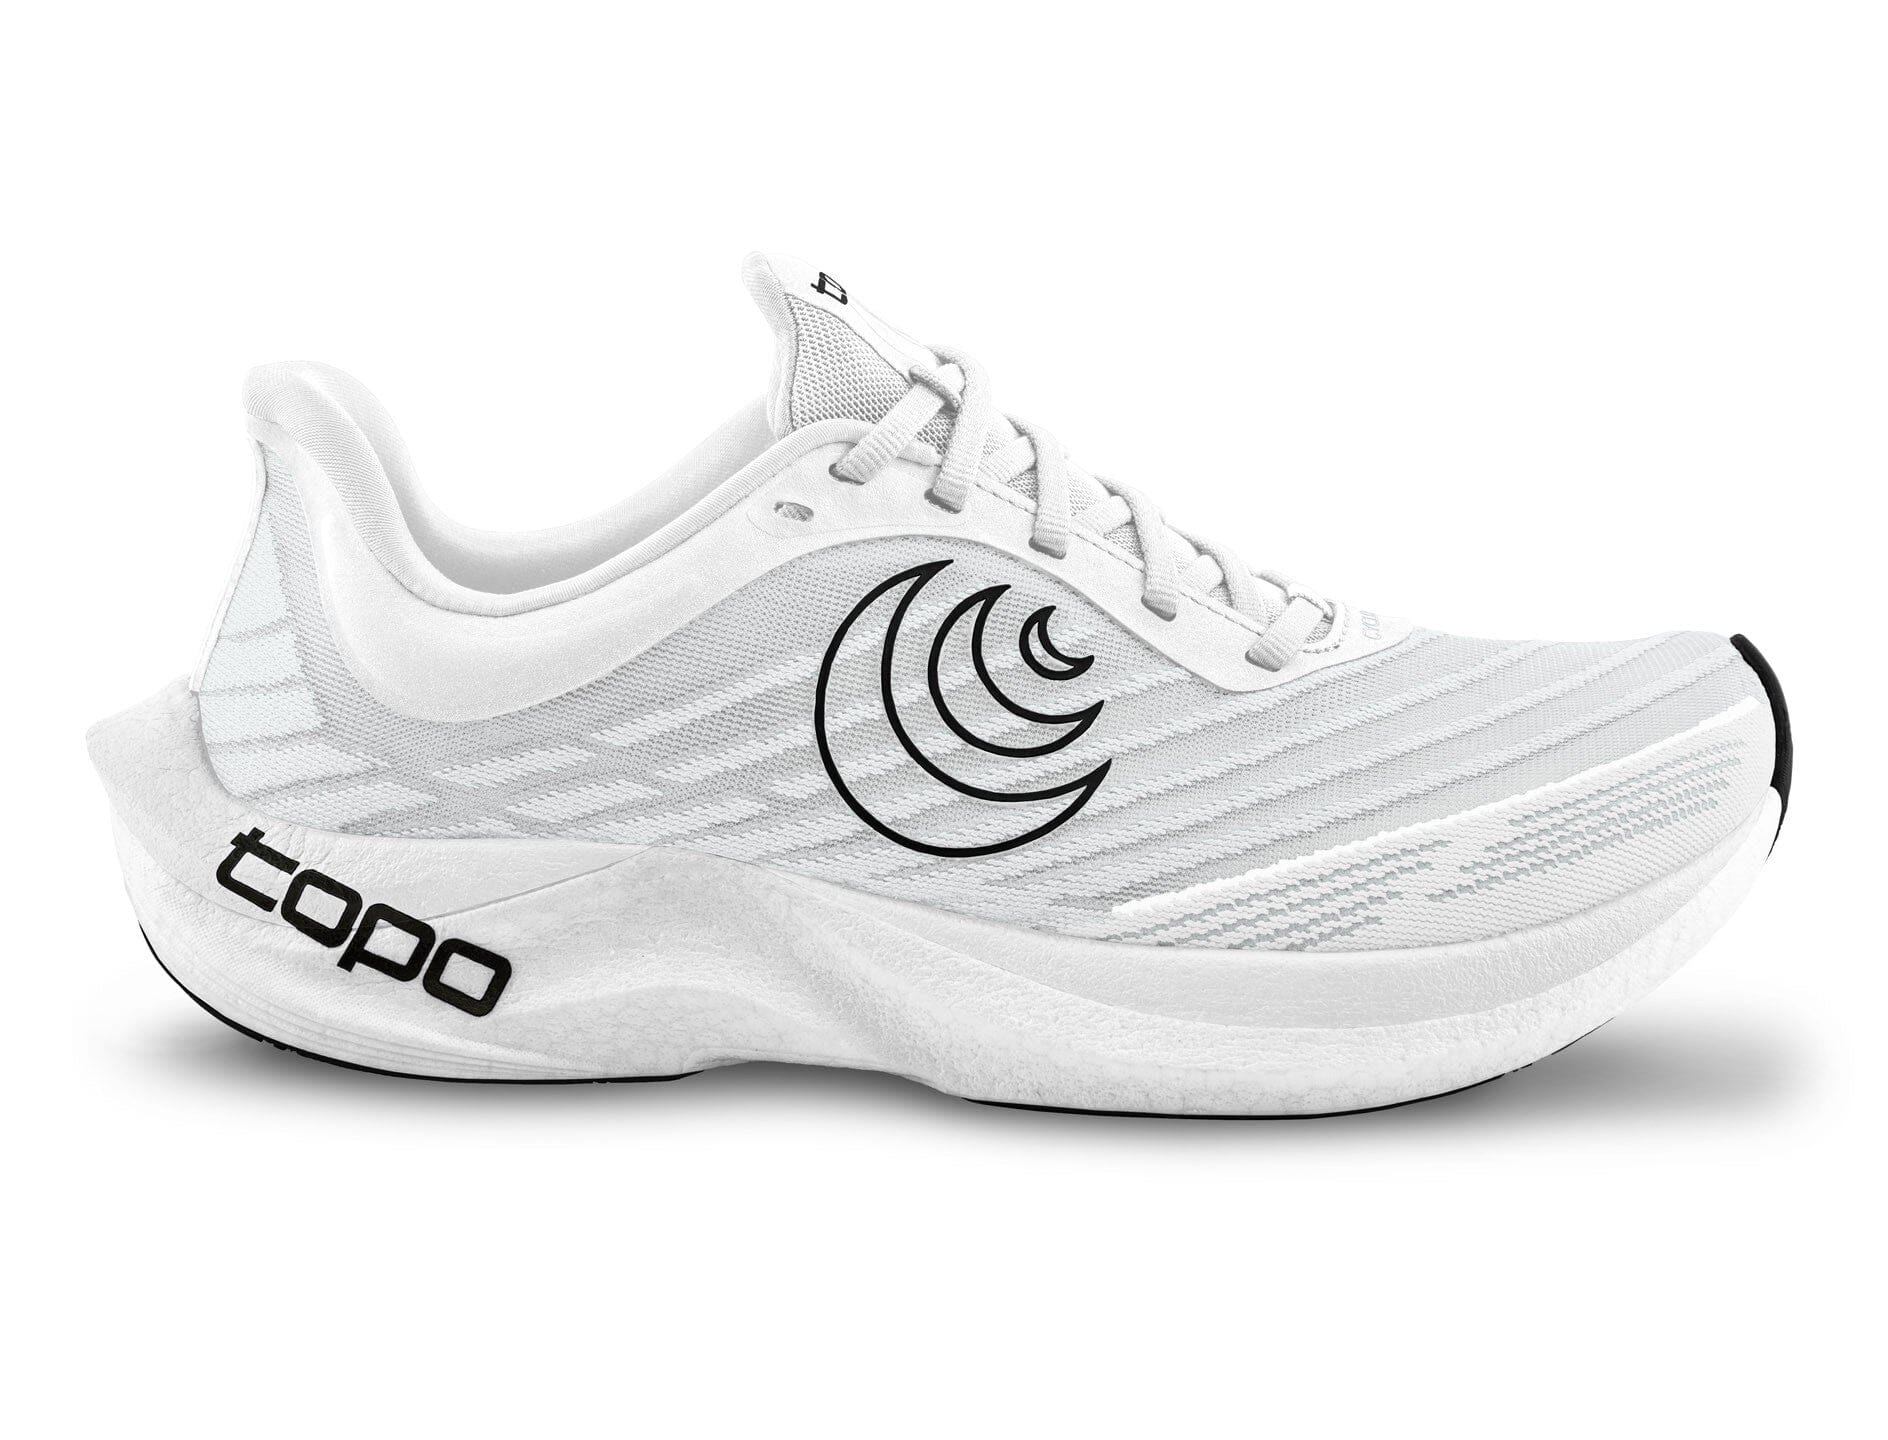 Topo Men's Cyclone 2 Road Running Shoes White/Black US 9 